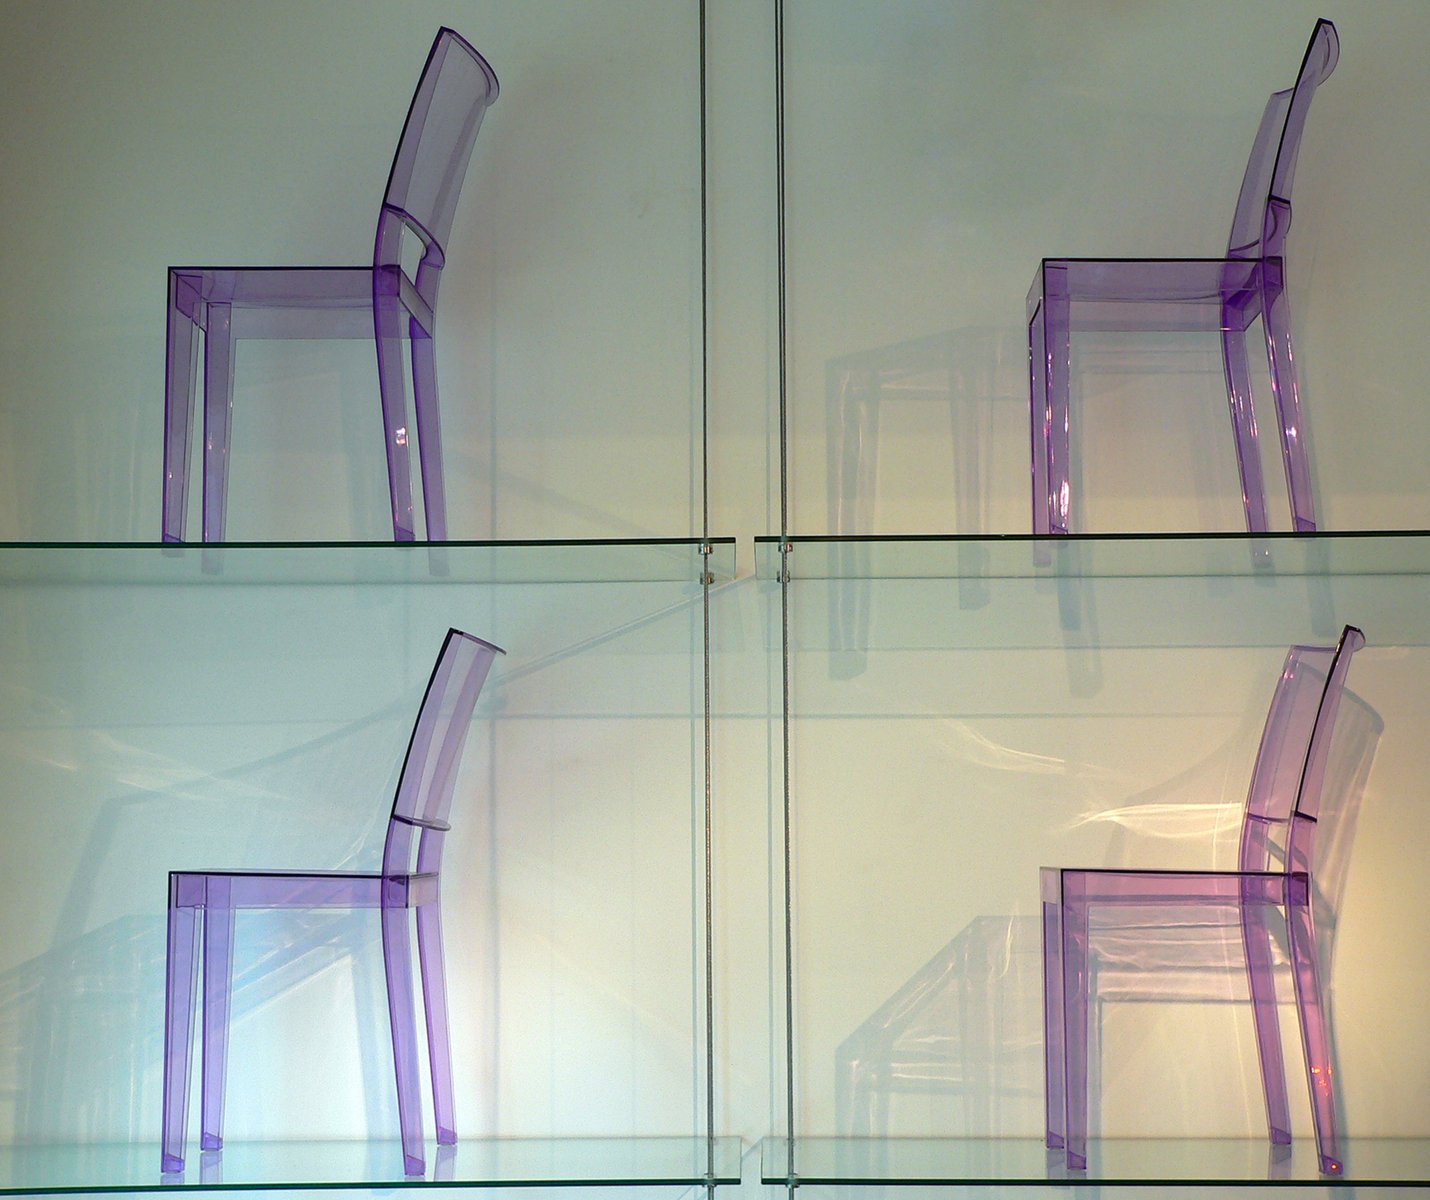 clear chairs sit against glass display cases in a museum